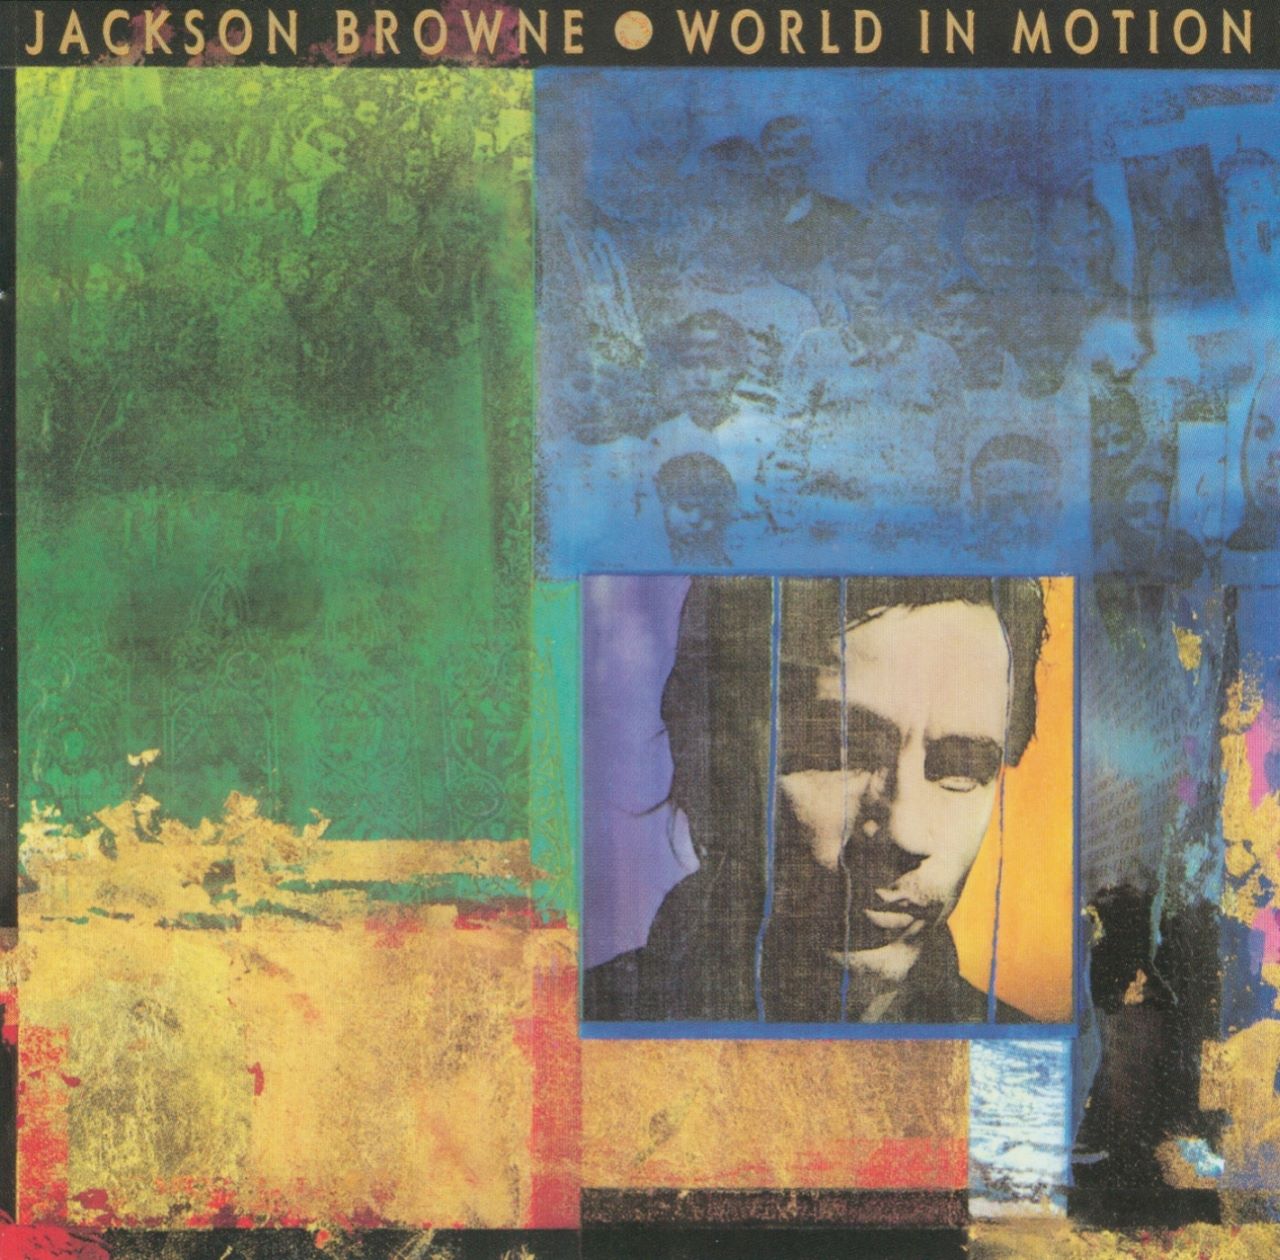 Jackson Browne - World In Motion cover album